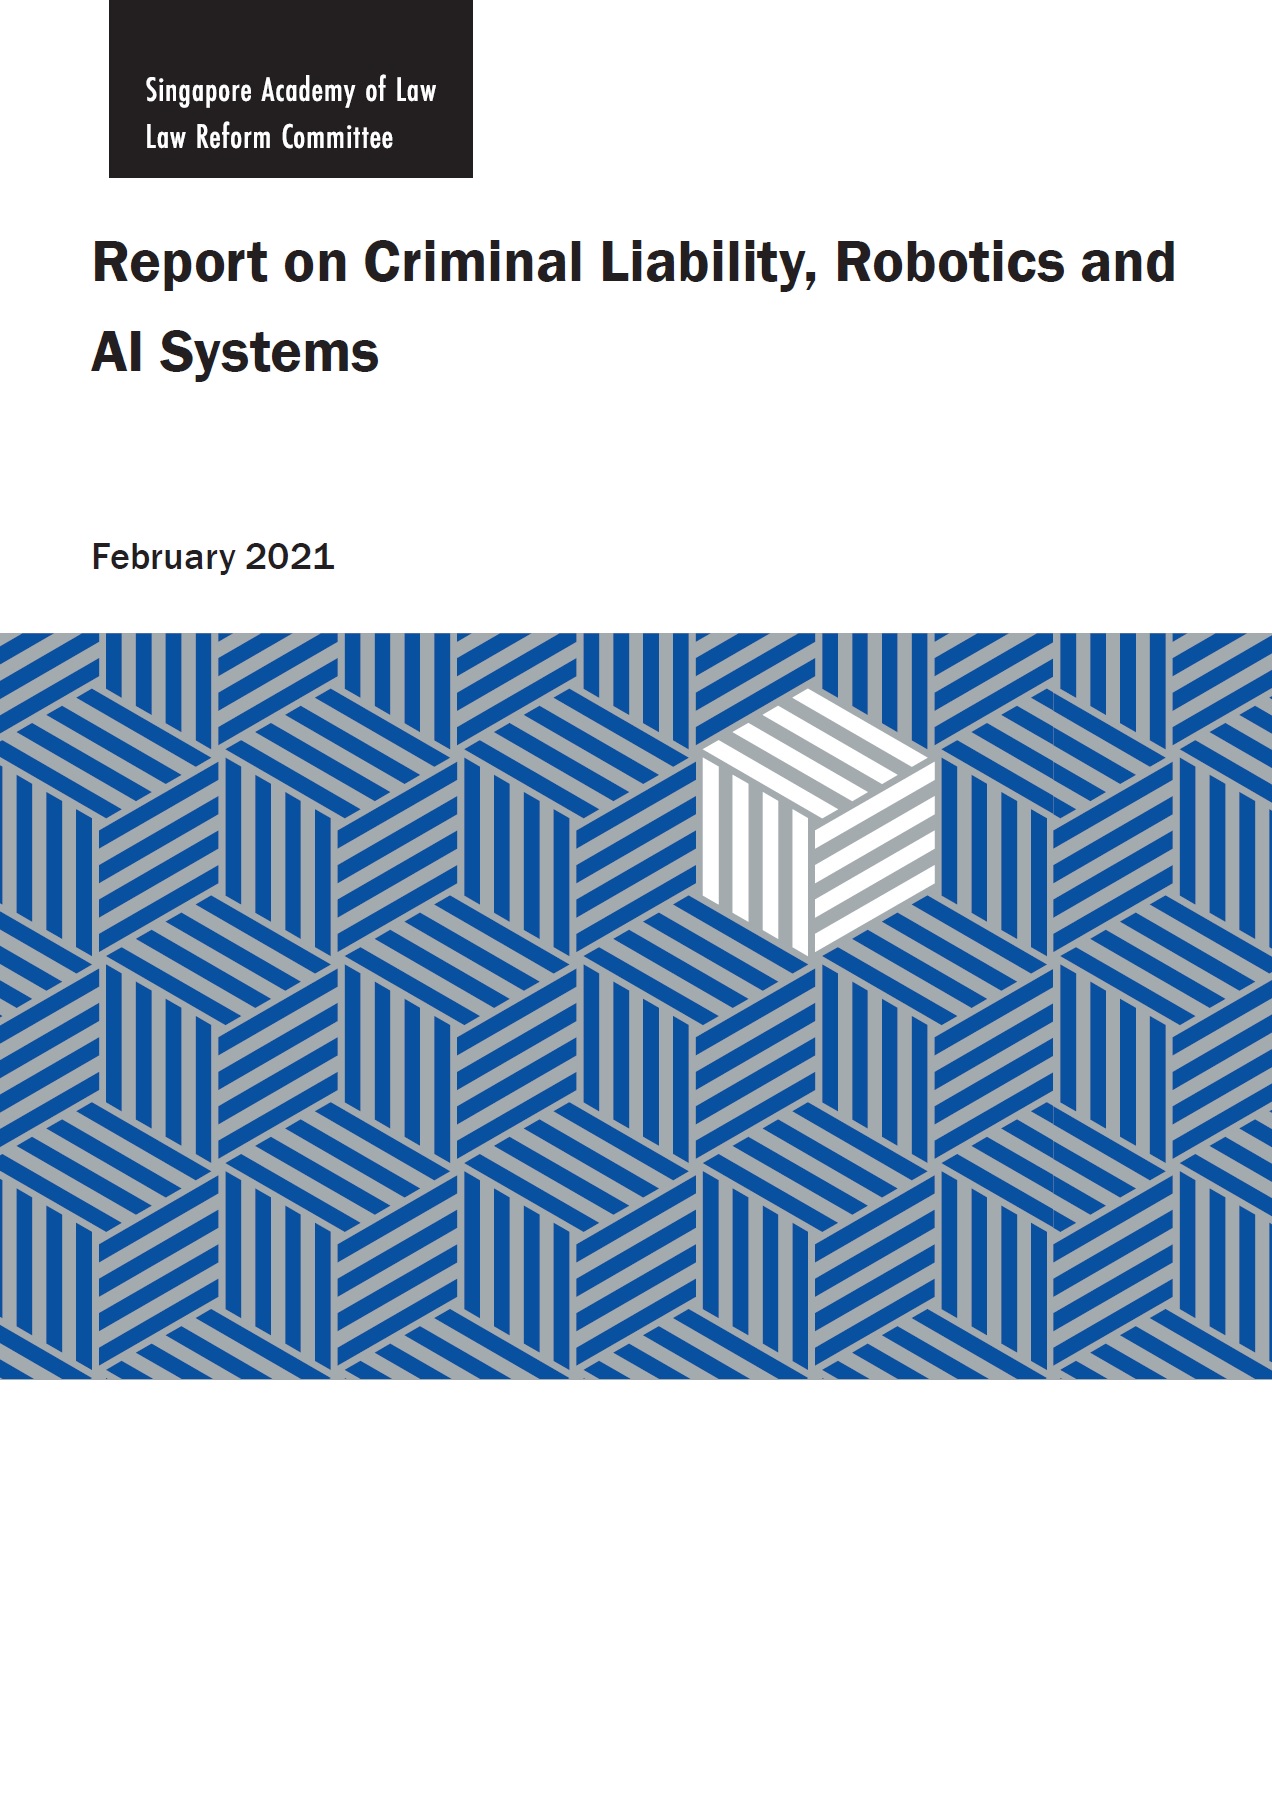 2021 Report on Criminal Liability, Robotics and AI Systems